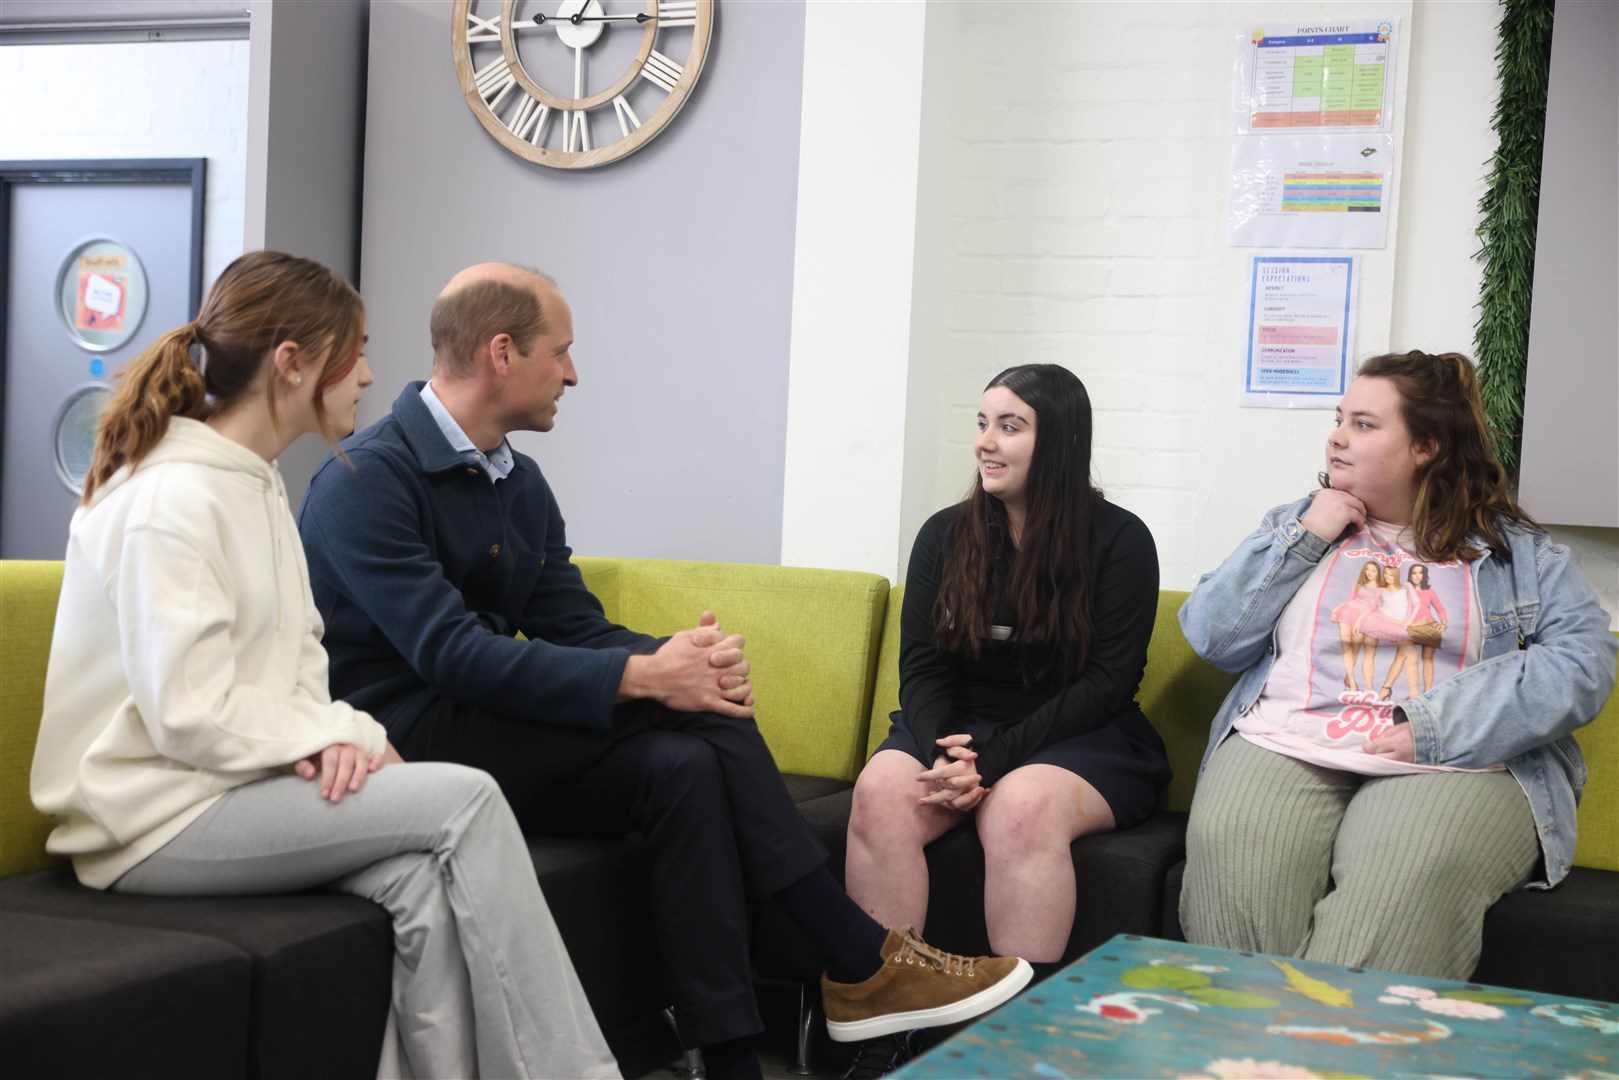 William chatting to some of the young people who use services at the Hanworth Centre Hub (Ian Vogler/Daily Mirror/PA)